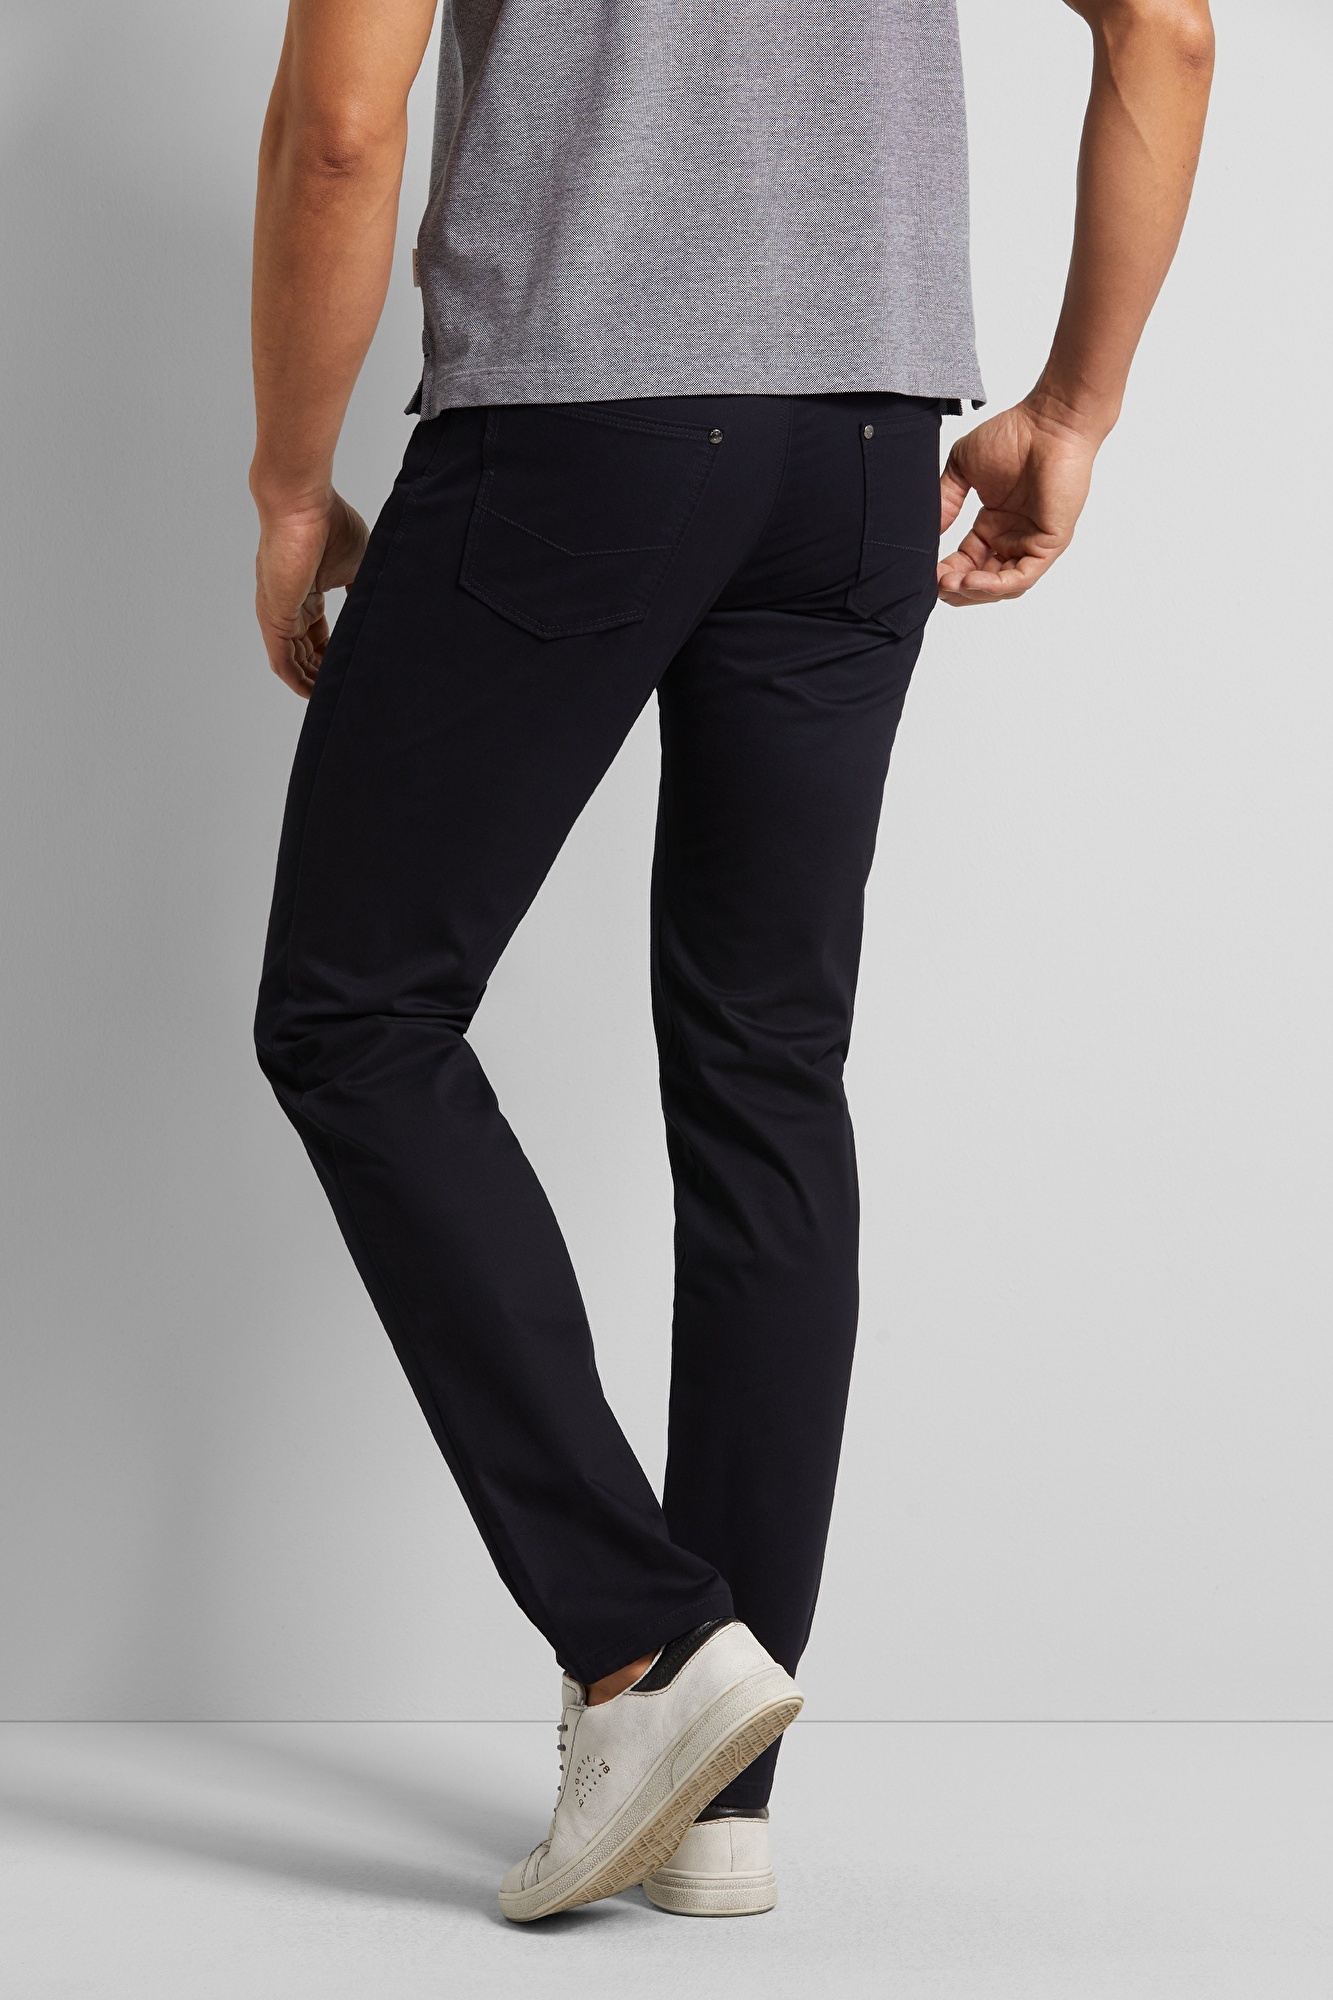 stretch Colour in five-pocket with Constant navy bugatti |